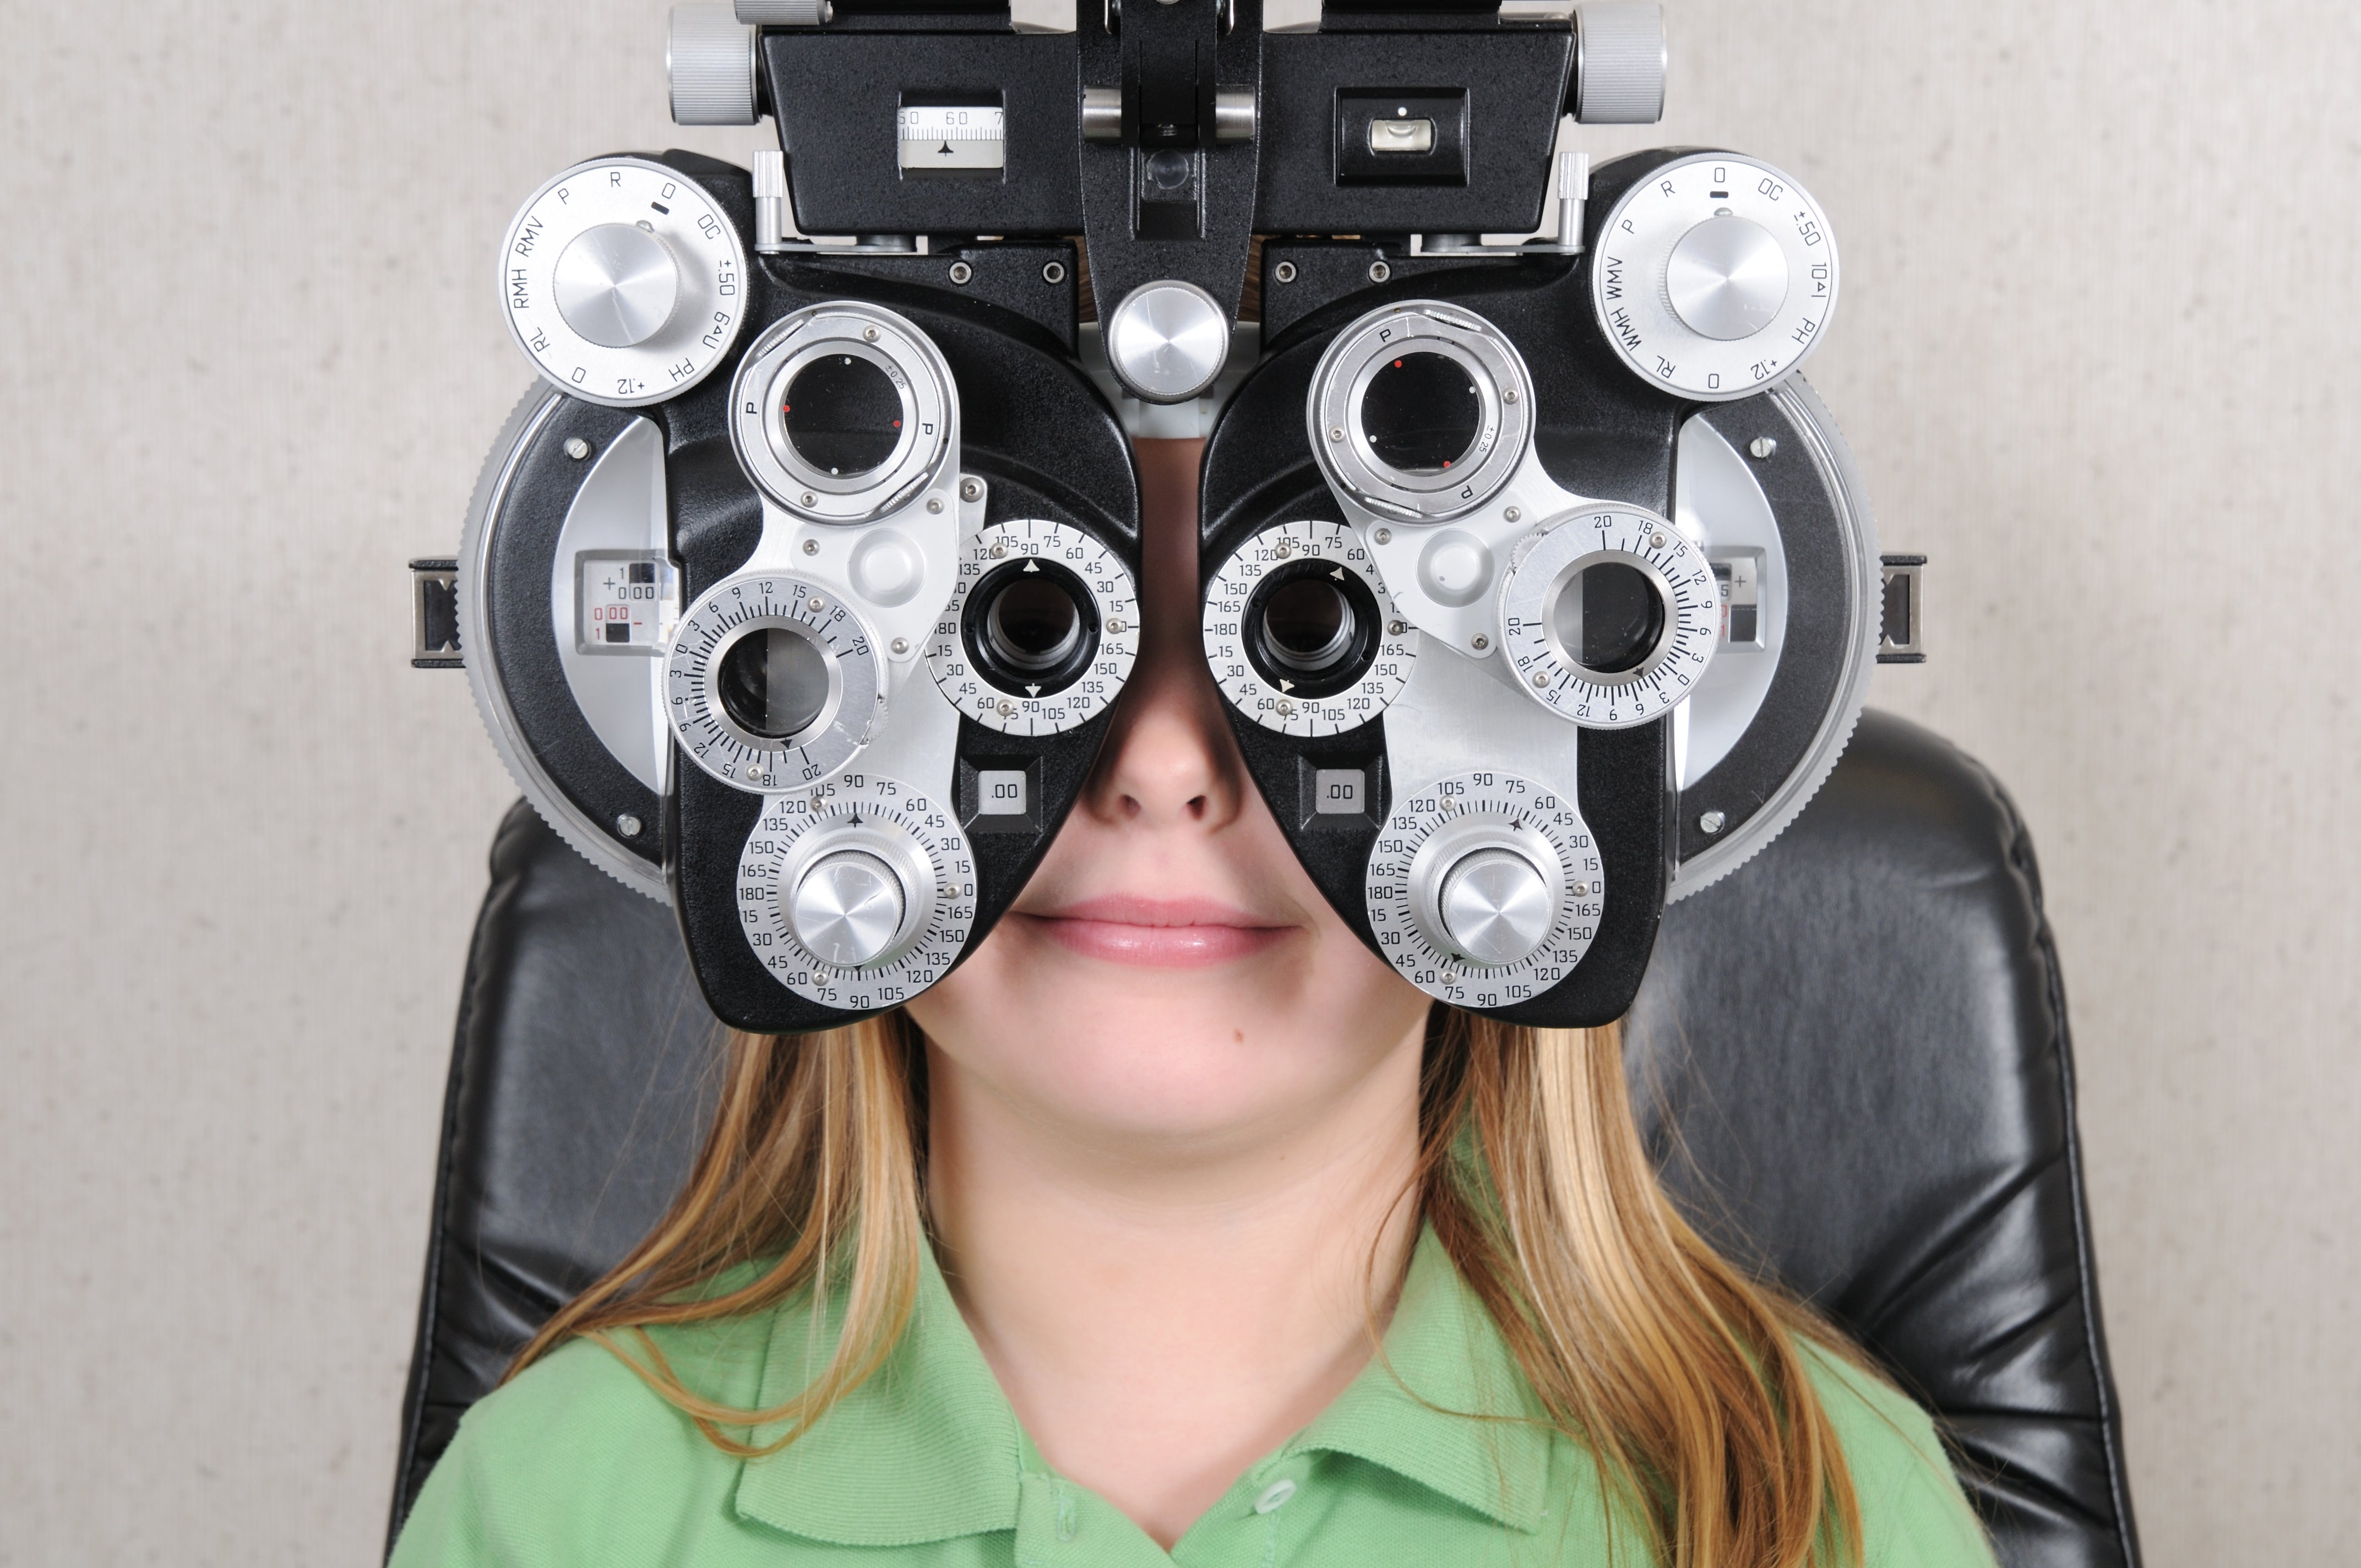 Young girl with blond hair and green short getting eye exam with phoropter.